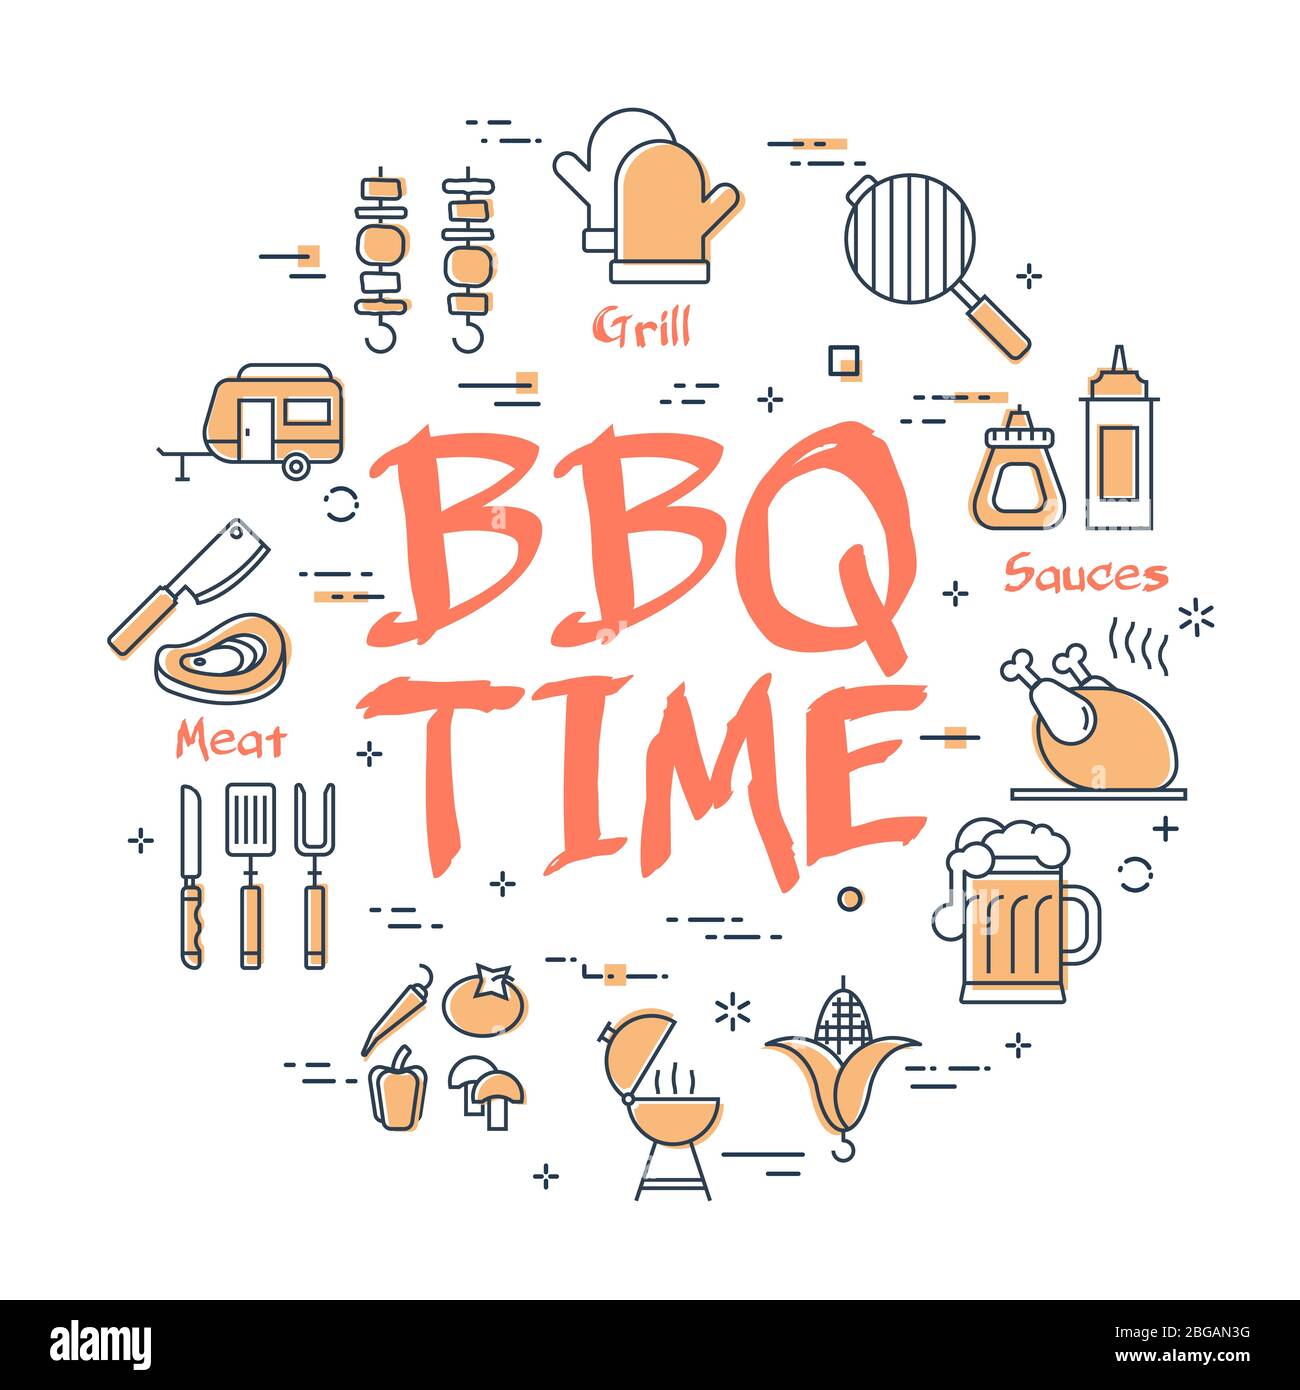 Vector line banner for picnic and barbecue party - BBQ TIME Stock Vector